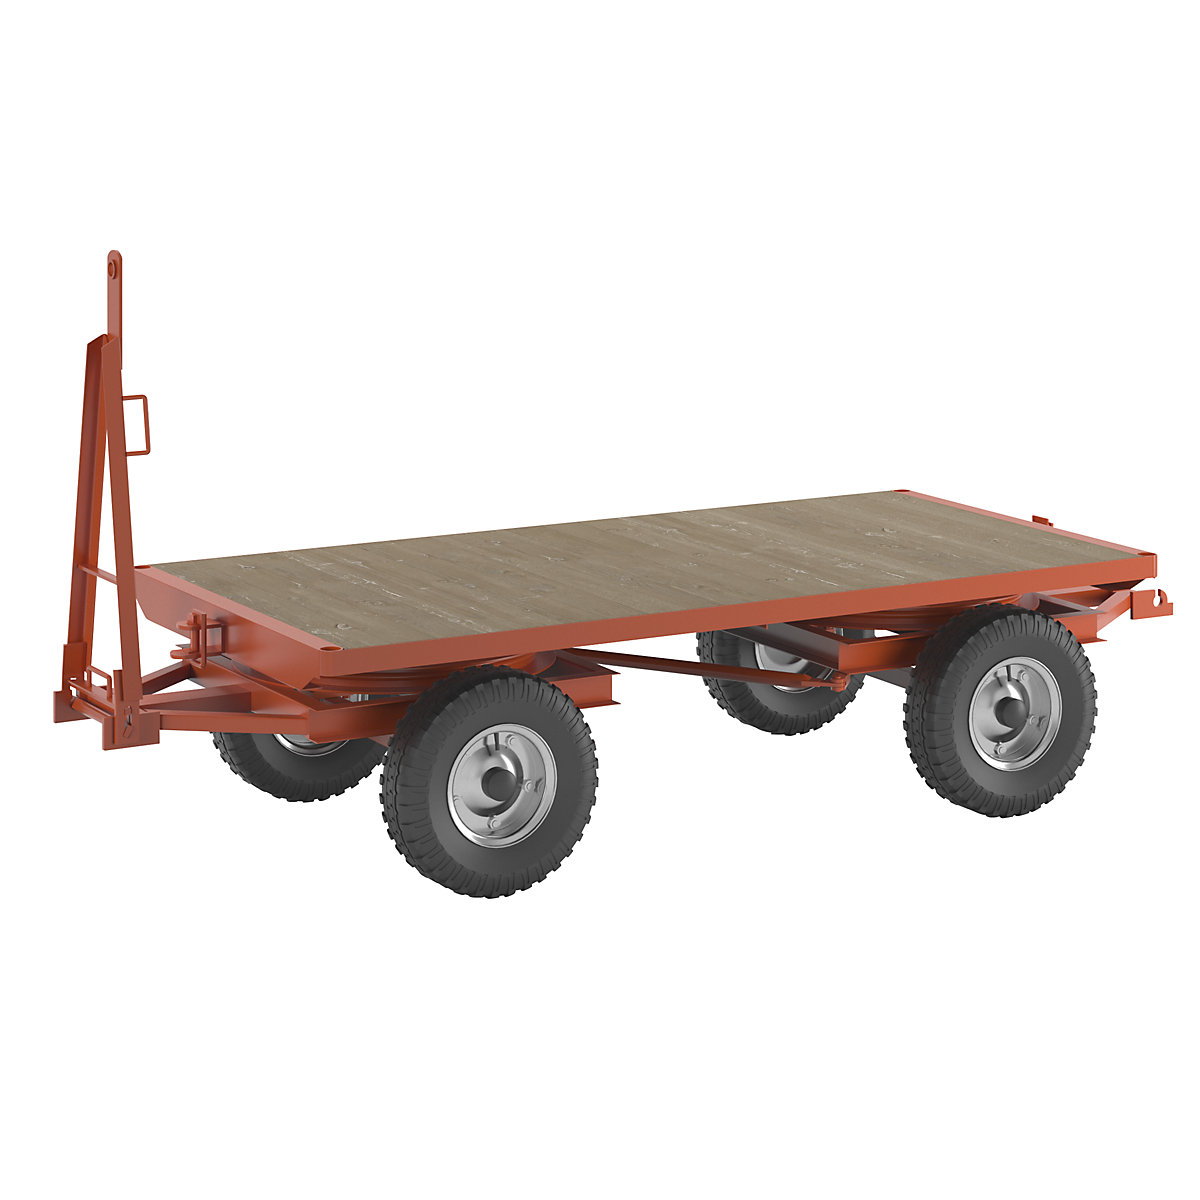 Trailer, 4-wheel double turntable steering, max. load 5 t, platform 2.5 x 1.25 m, pneumatic tyres-16